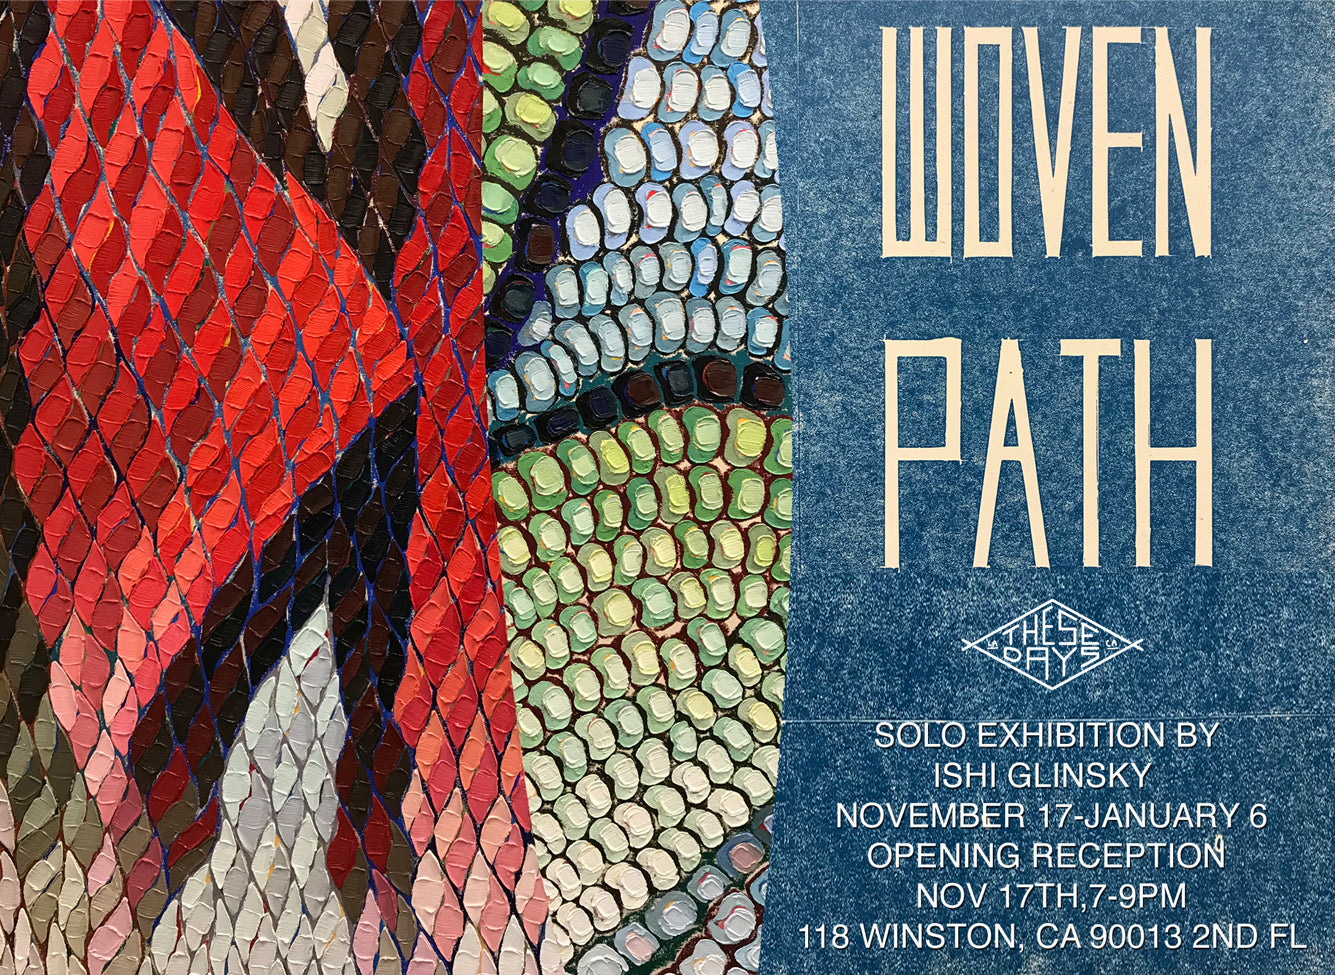 WOVEN PATH | Solo Exhibition by Ishi Glinsky